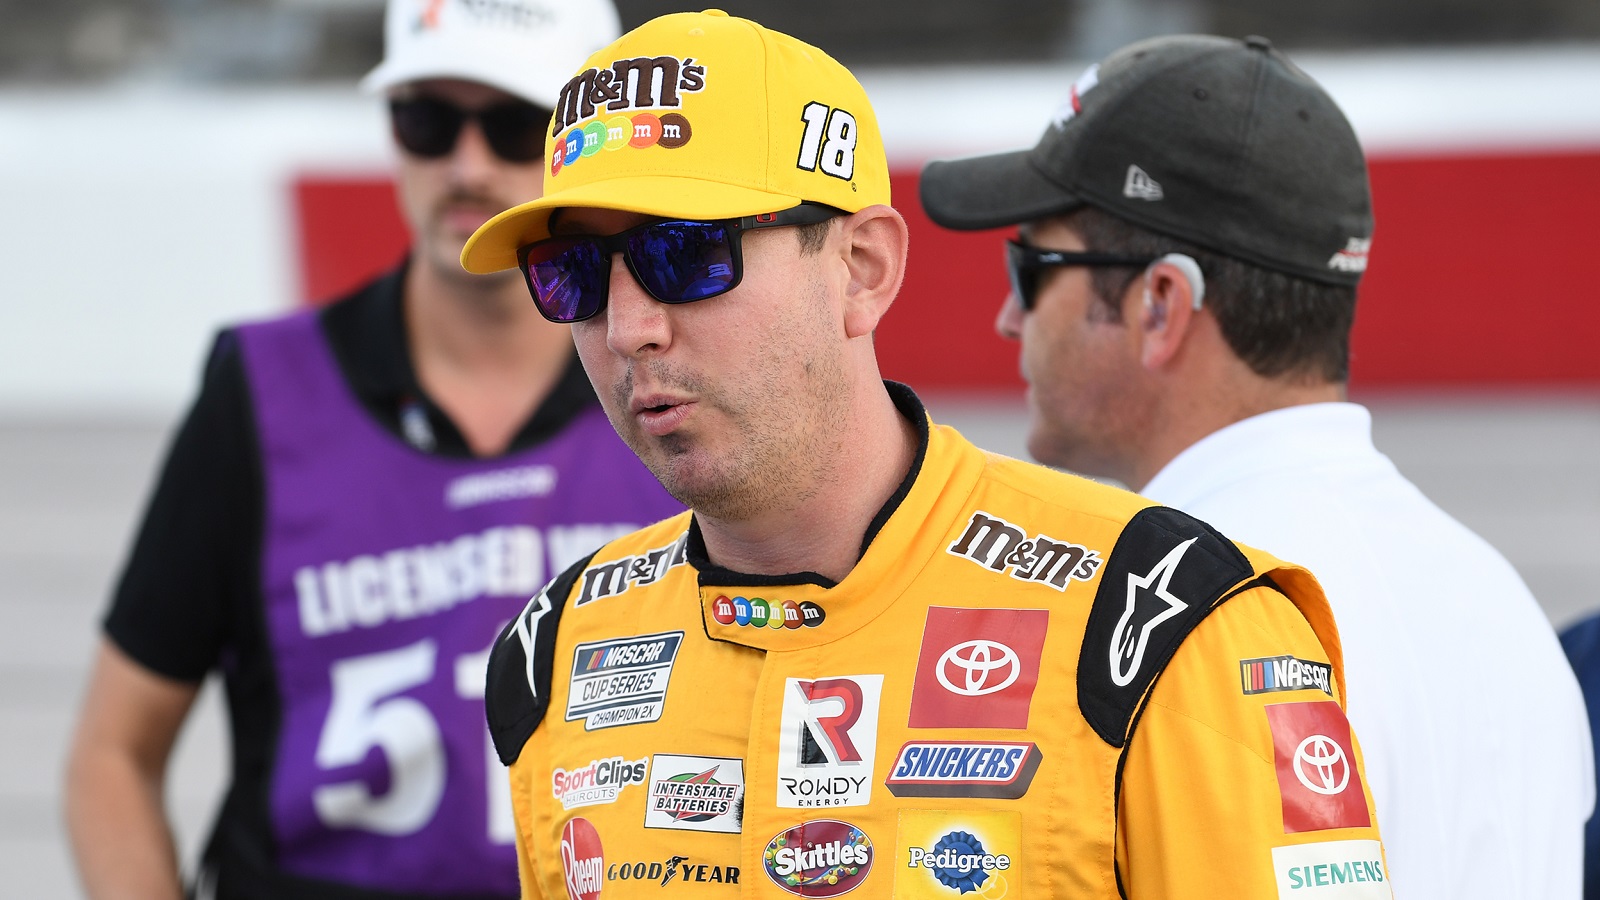 Why Did Richard Childress Punch Kyle Busch in the ‘Hold My Watch’ Incident?